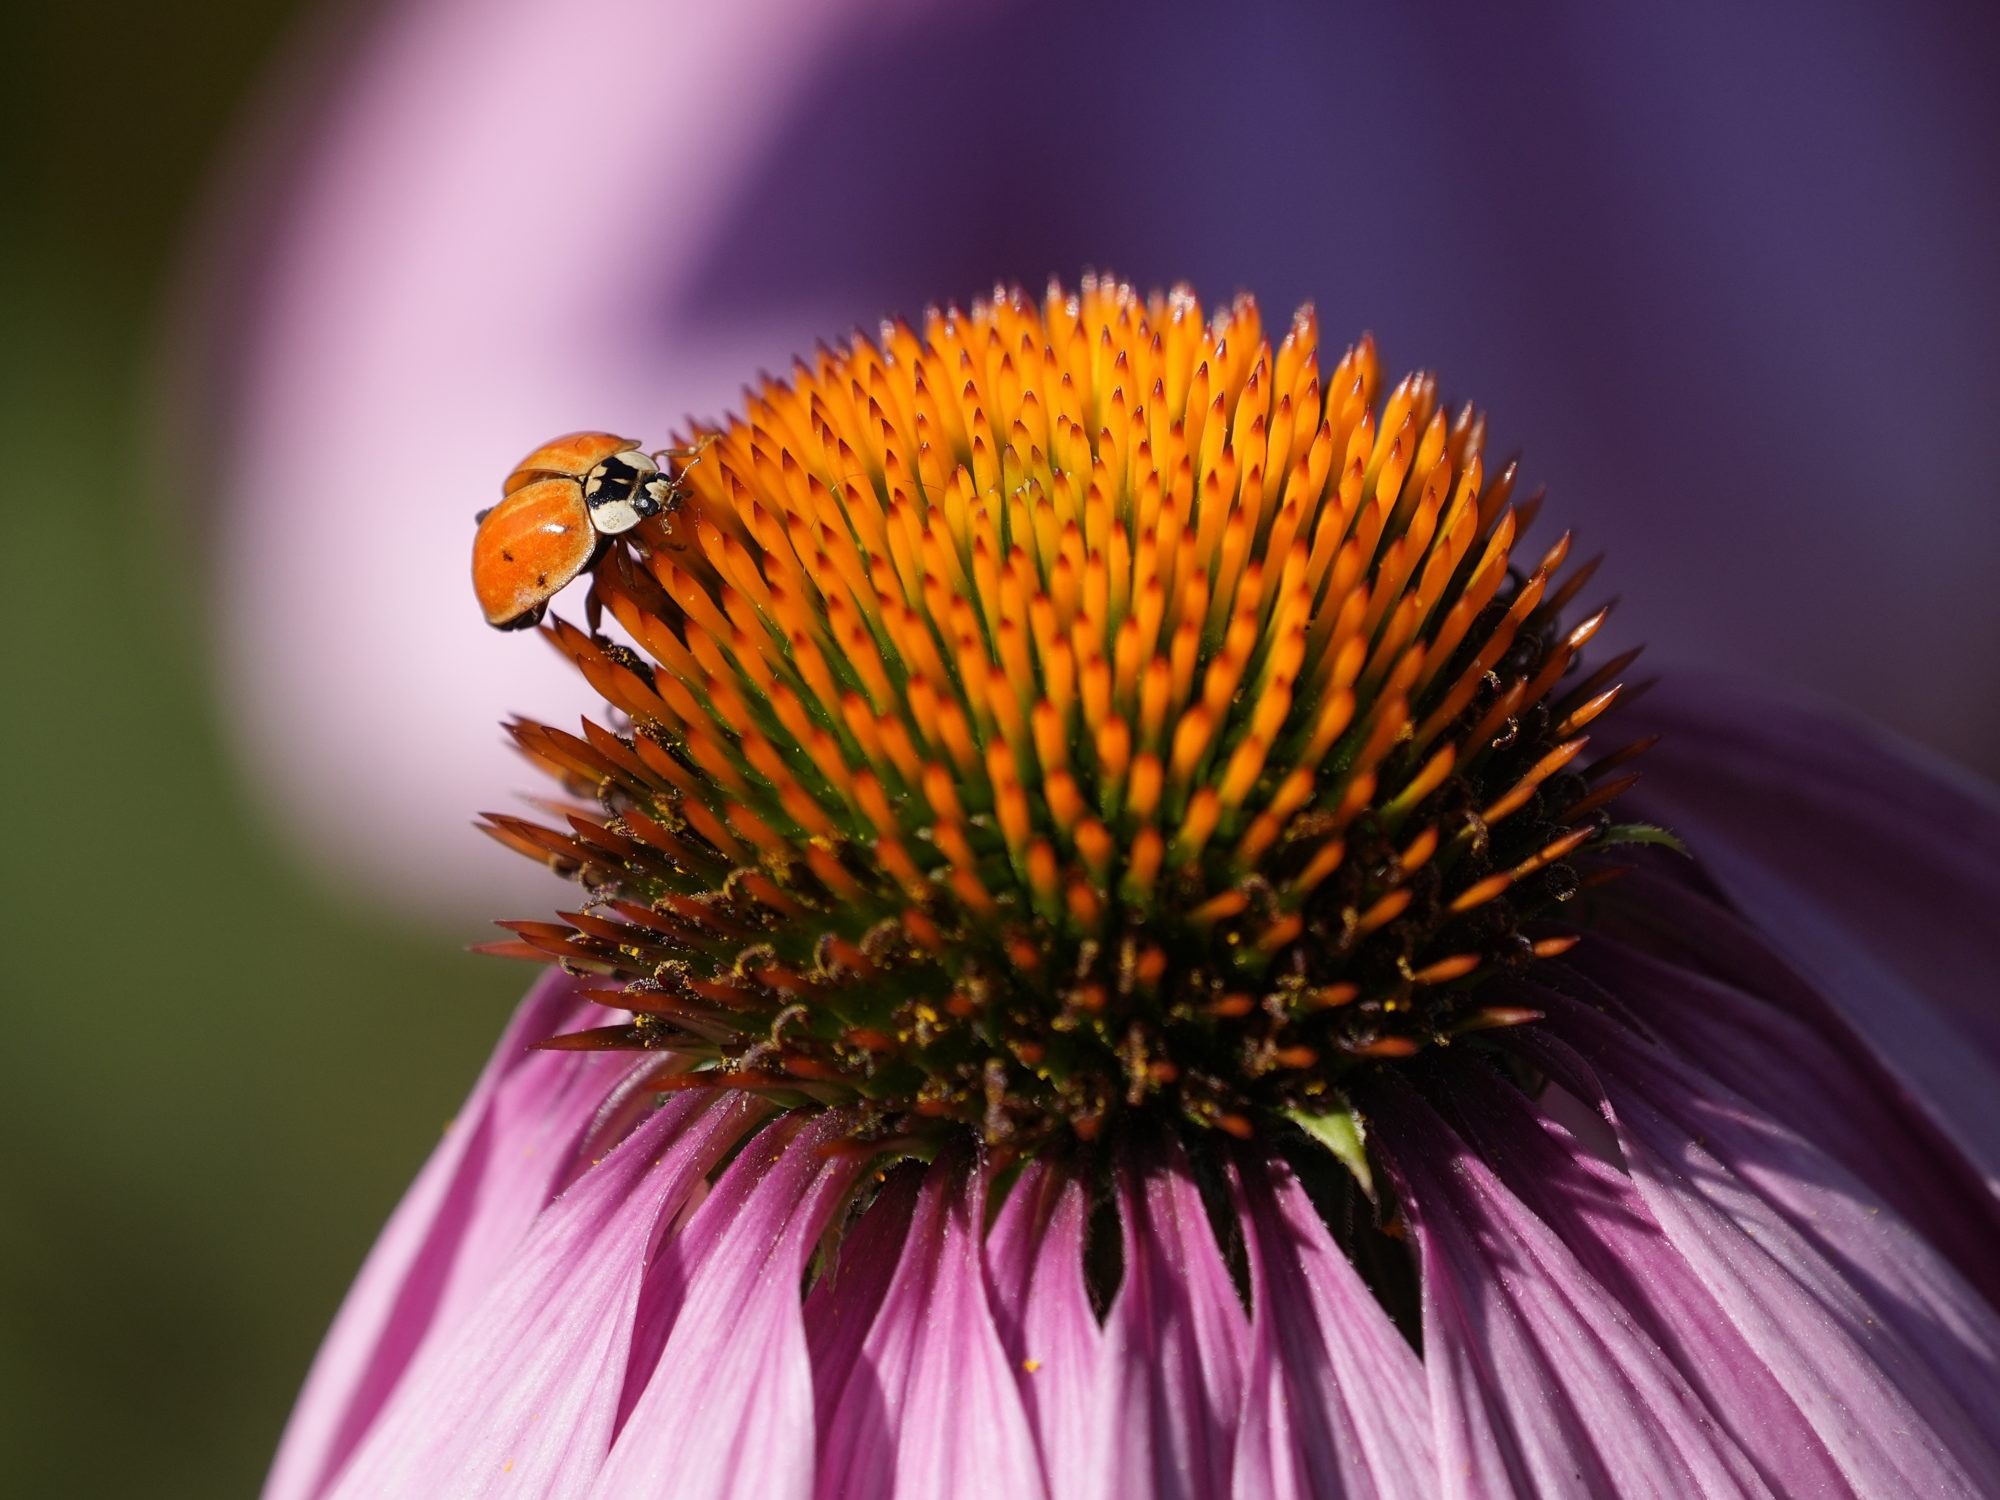 A ladybug on a coneflower, its wing casings slightly open